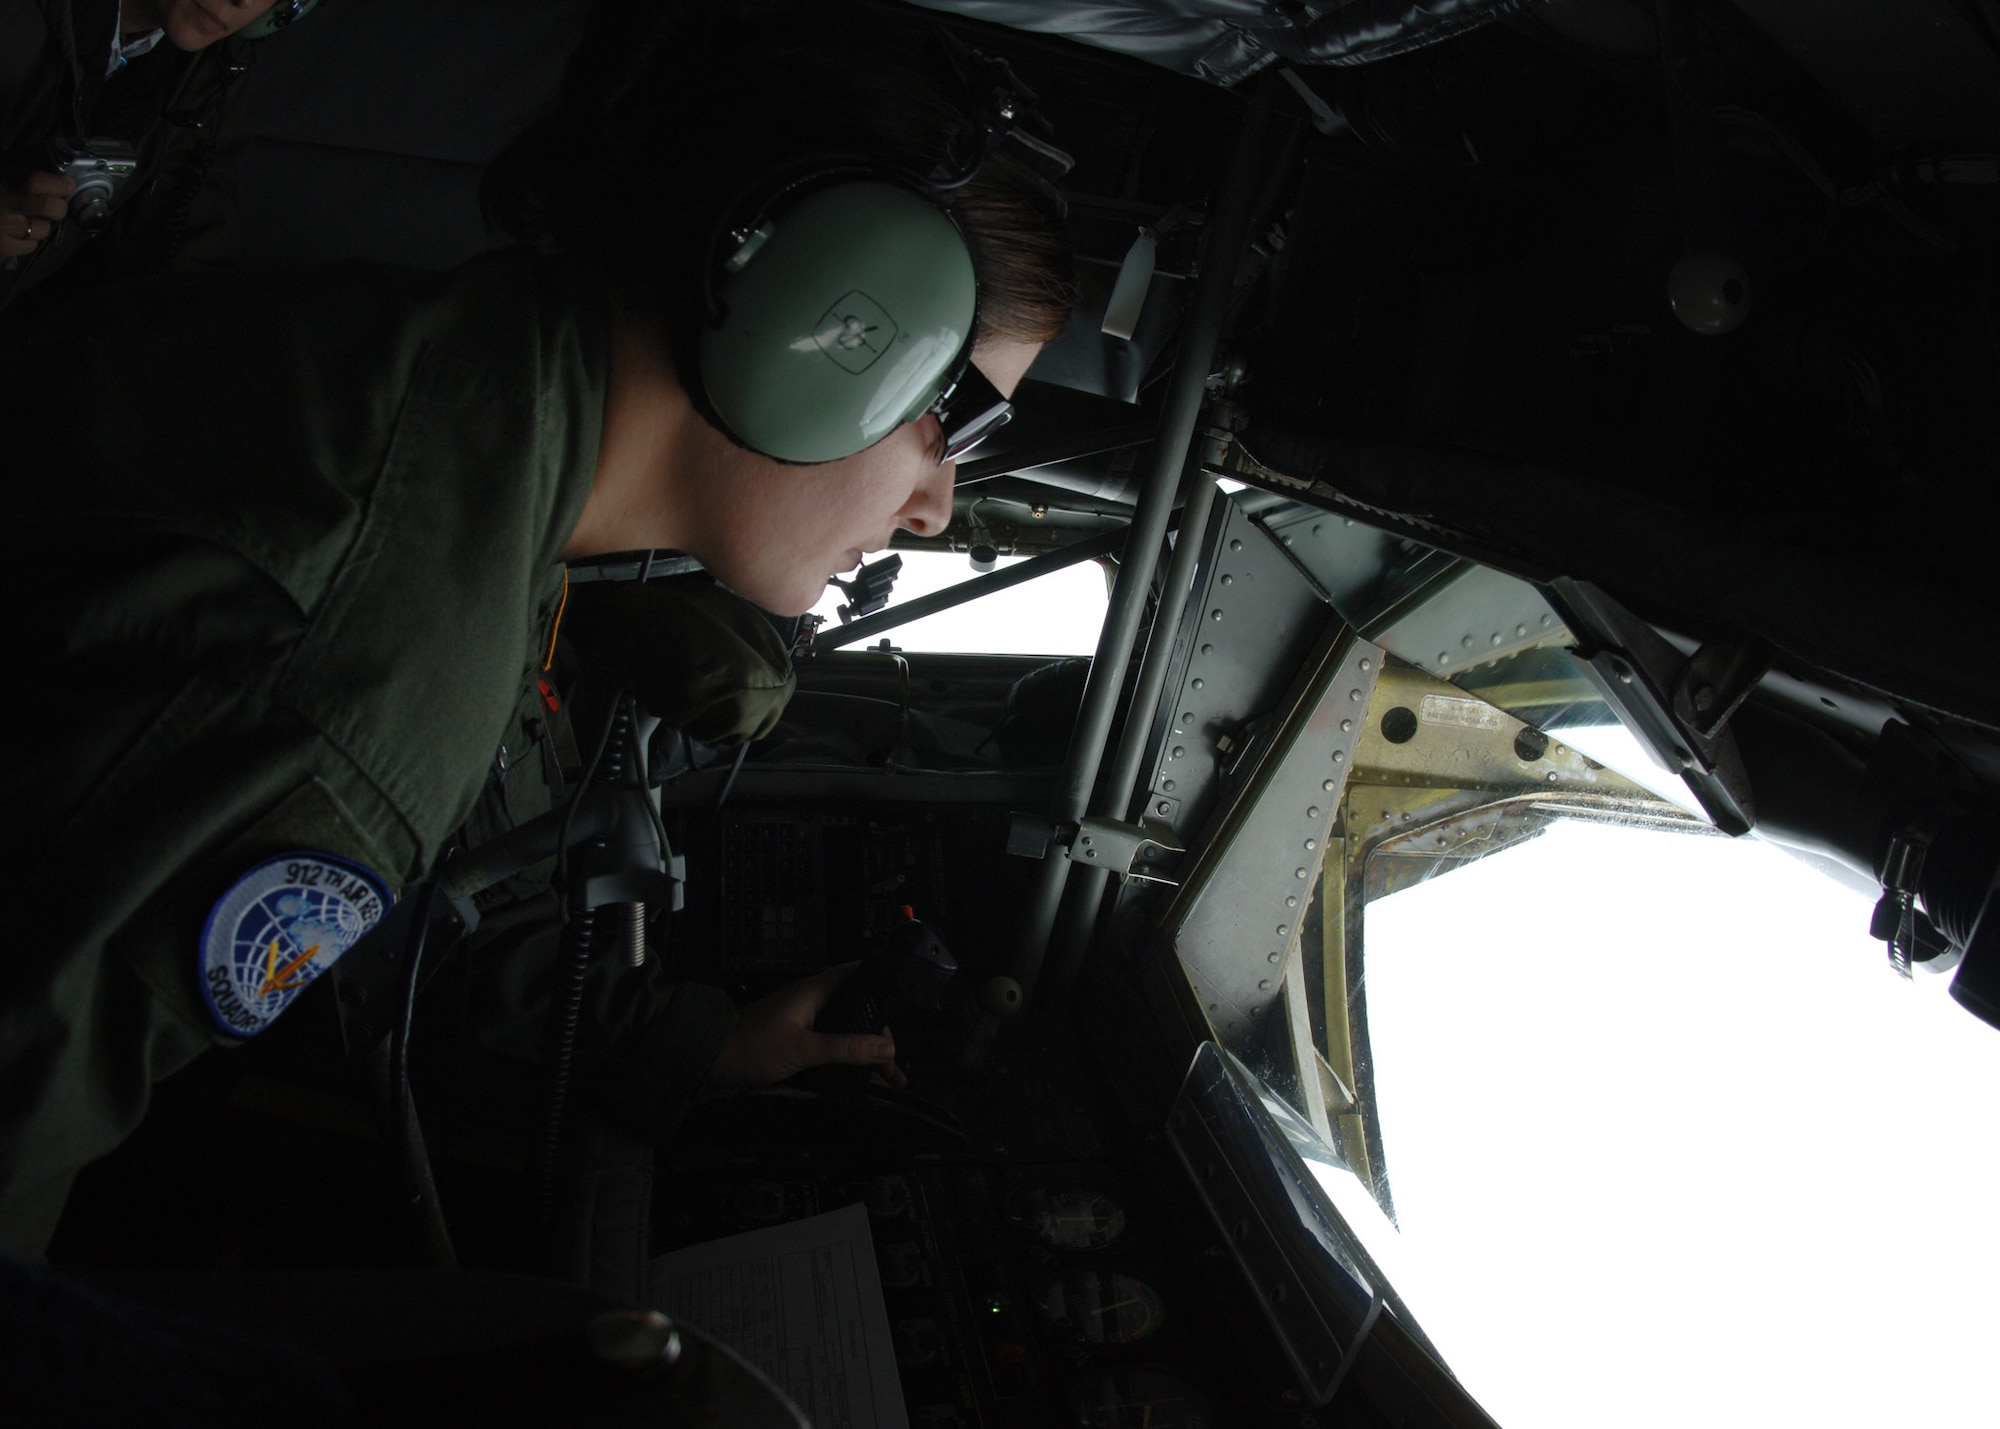 GRAND FORKS AIR FORCE BASE, N.D. -- Senior Airman Whitney Bankston, 912th Air Refueling Squadron, prepares to administer fuel to an Air Force Thunderbird over the Midwestern United States during a Air Refueling mission on October 1, 2007.  (U.S. Air Force photo by Airman 1st Class Chad M. Kellum)